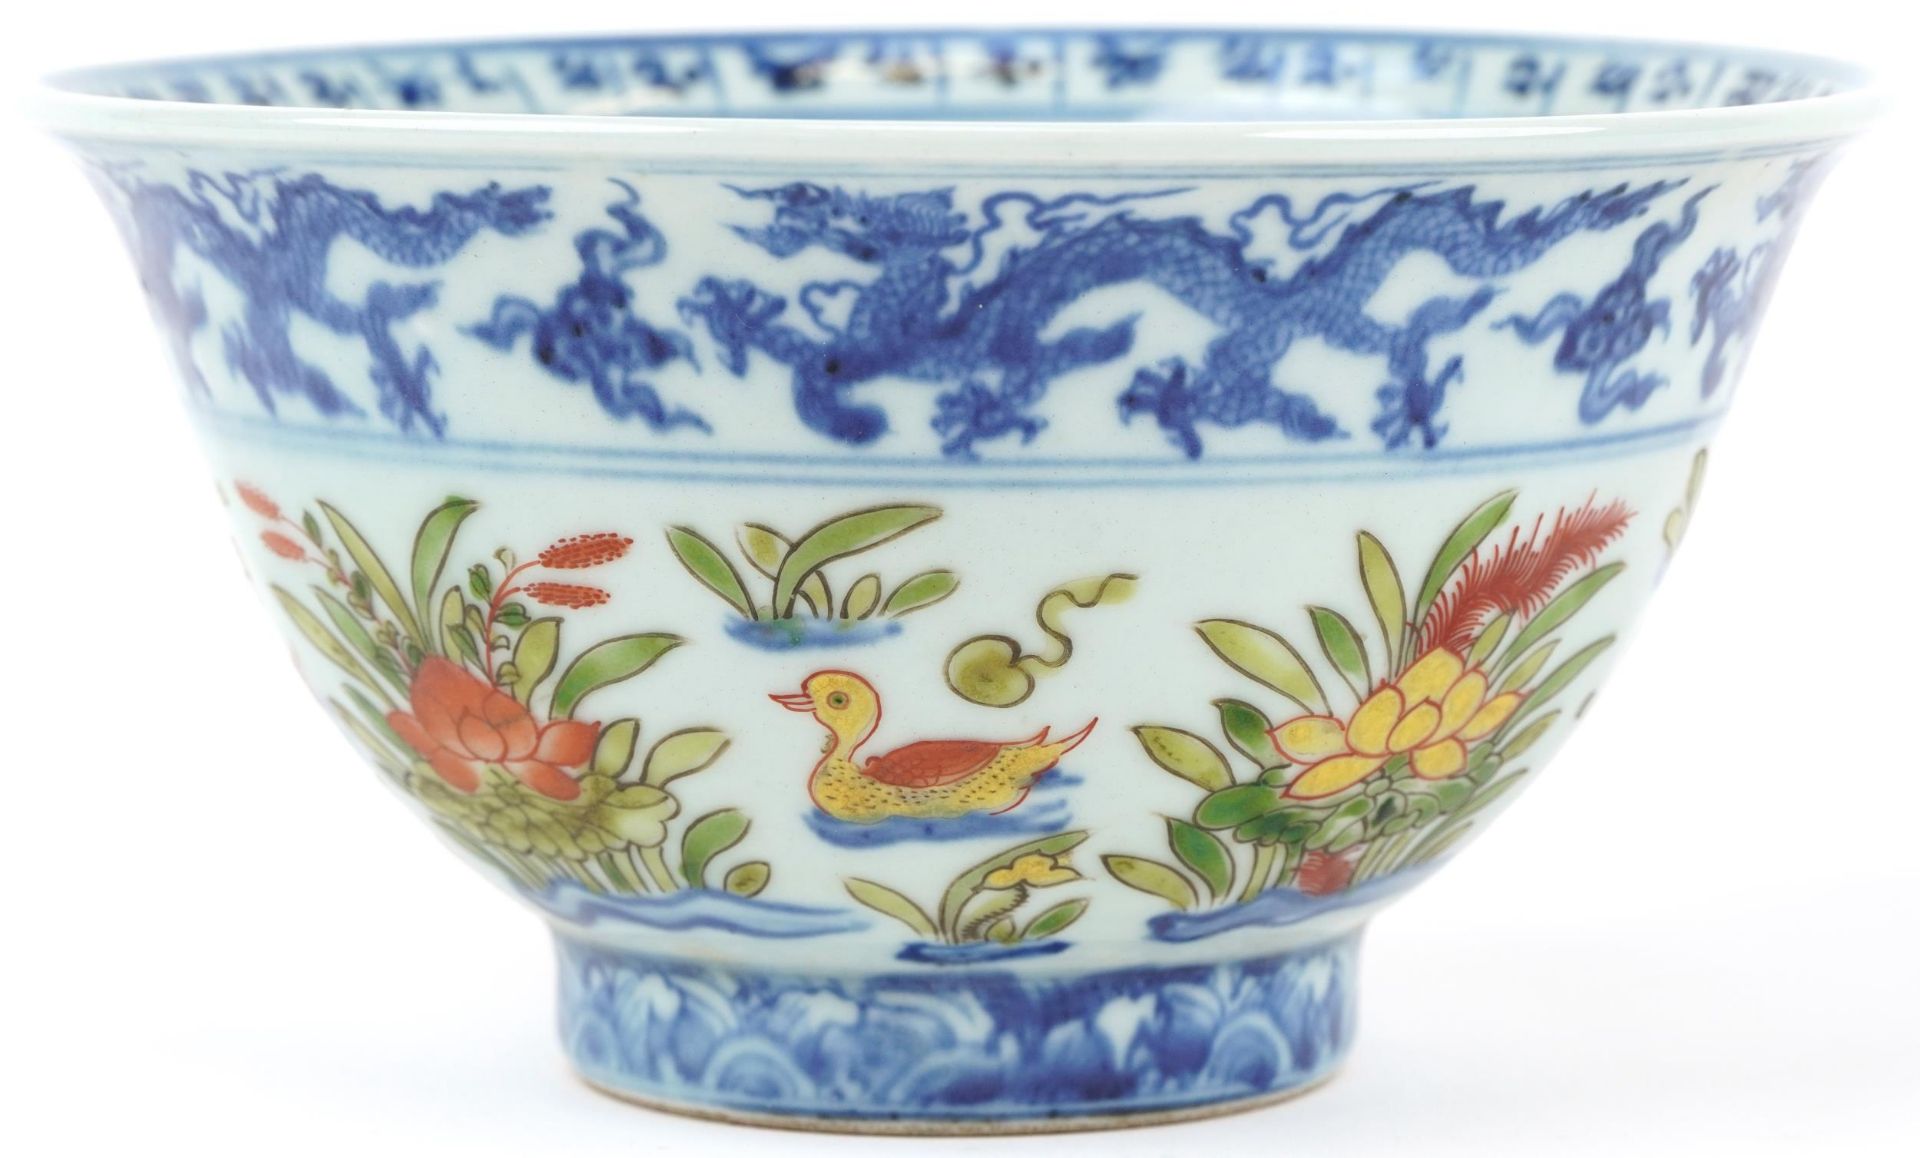 Chinese doucai porcelain bowl hand painted with ducklings in water amongst flowers, six figure